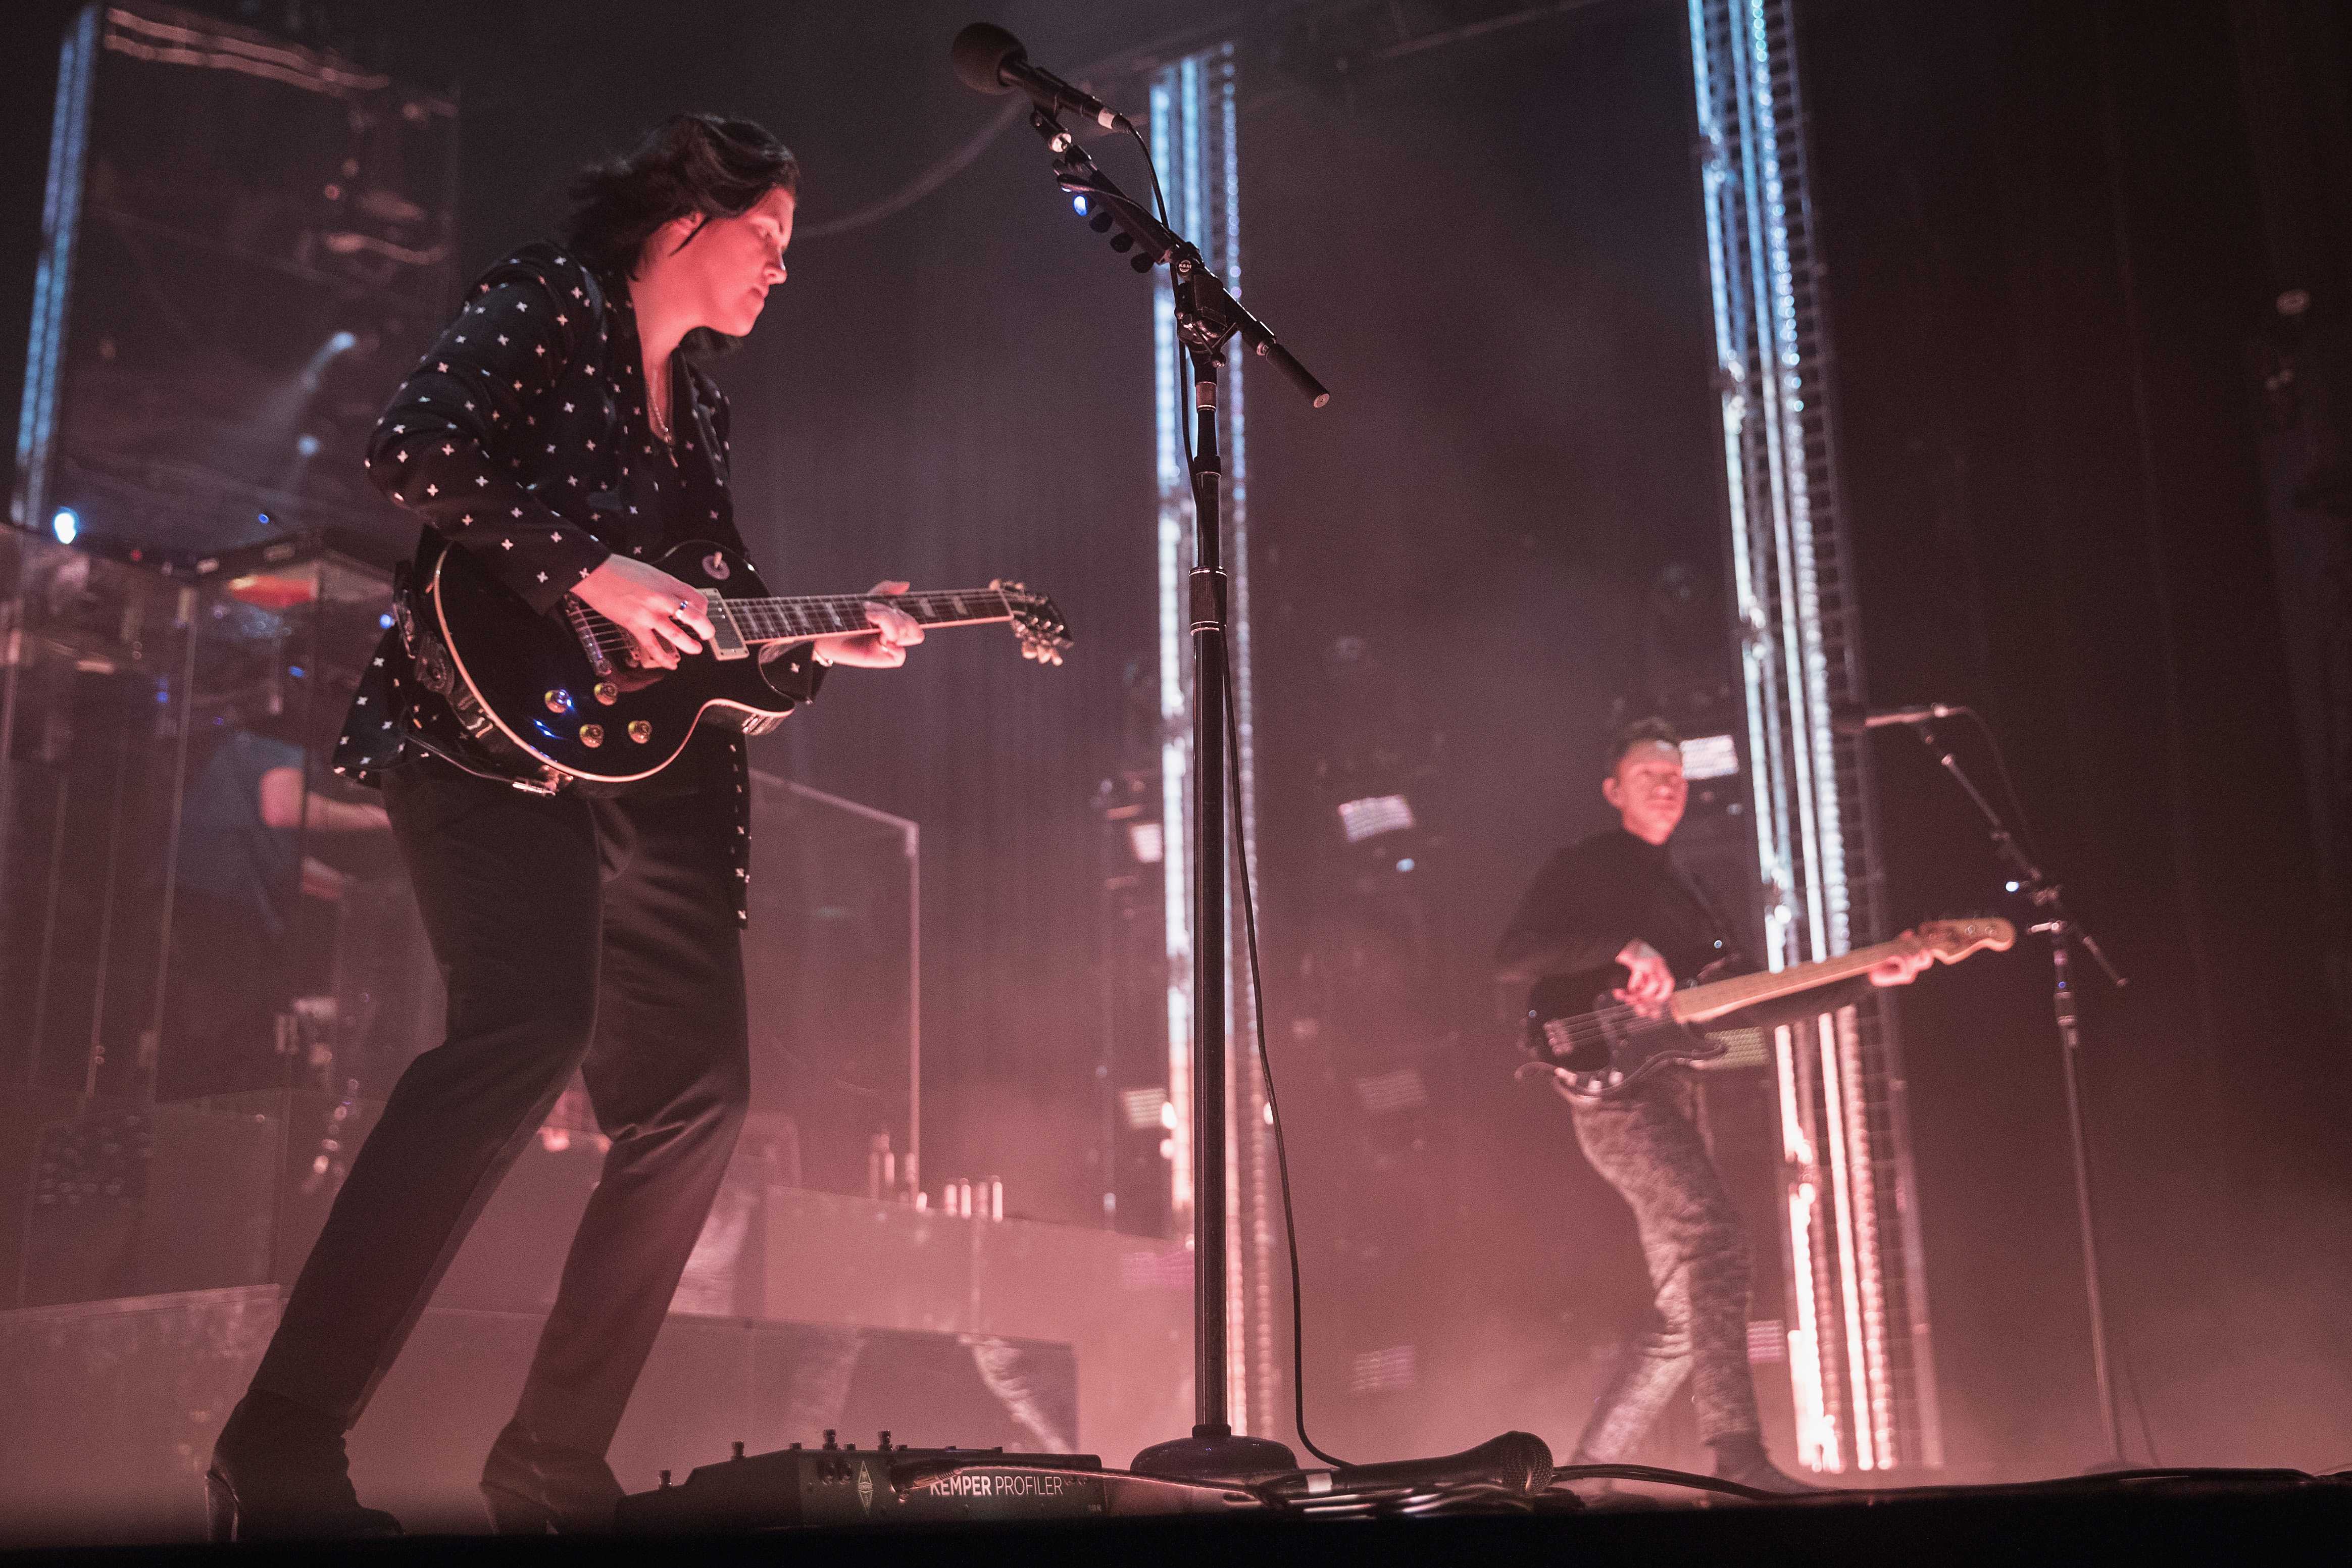 The xx to Curate <i>I See You</i> Film Series in Copenhagen